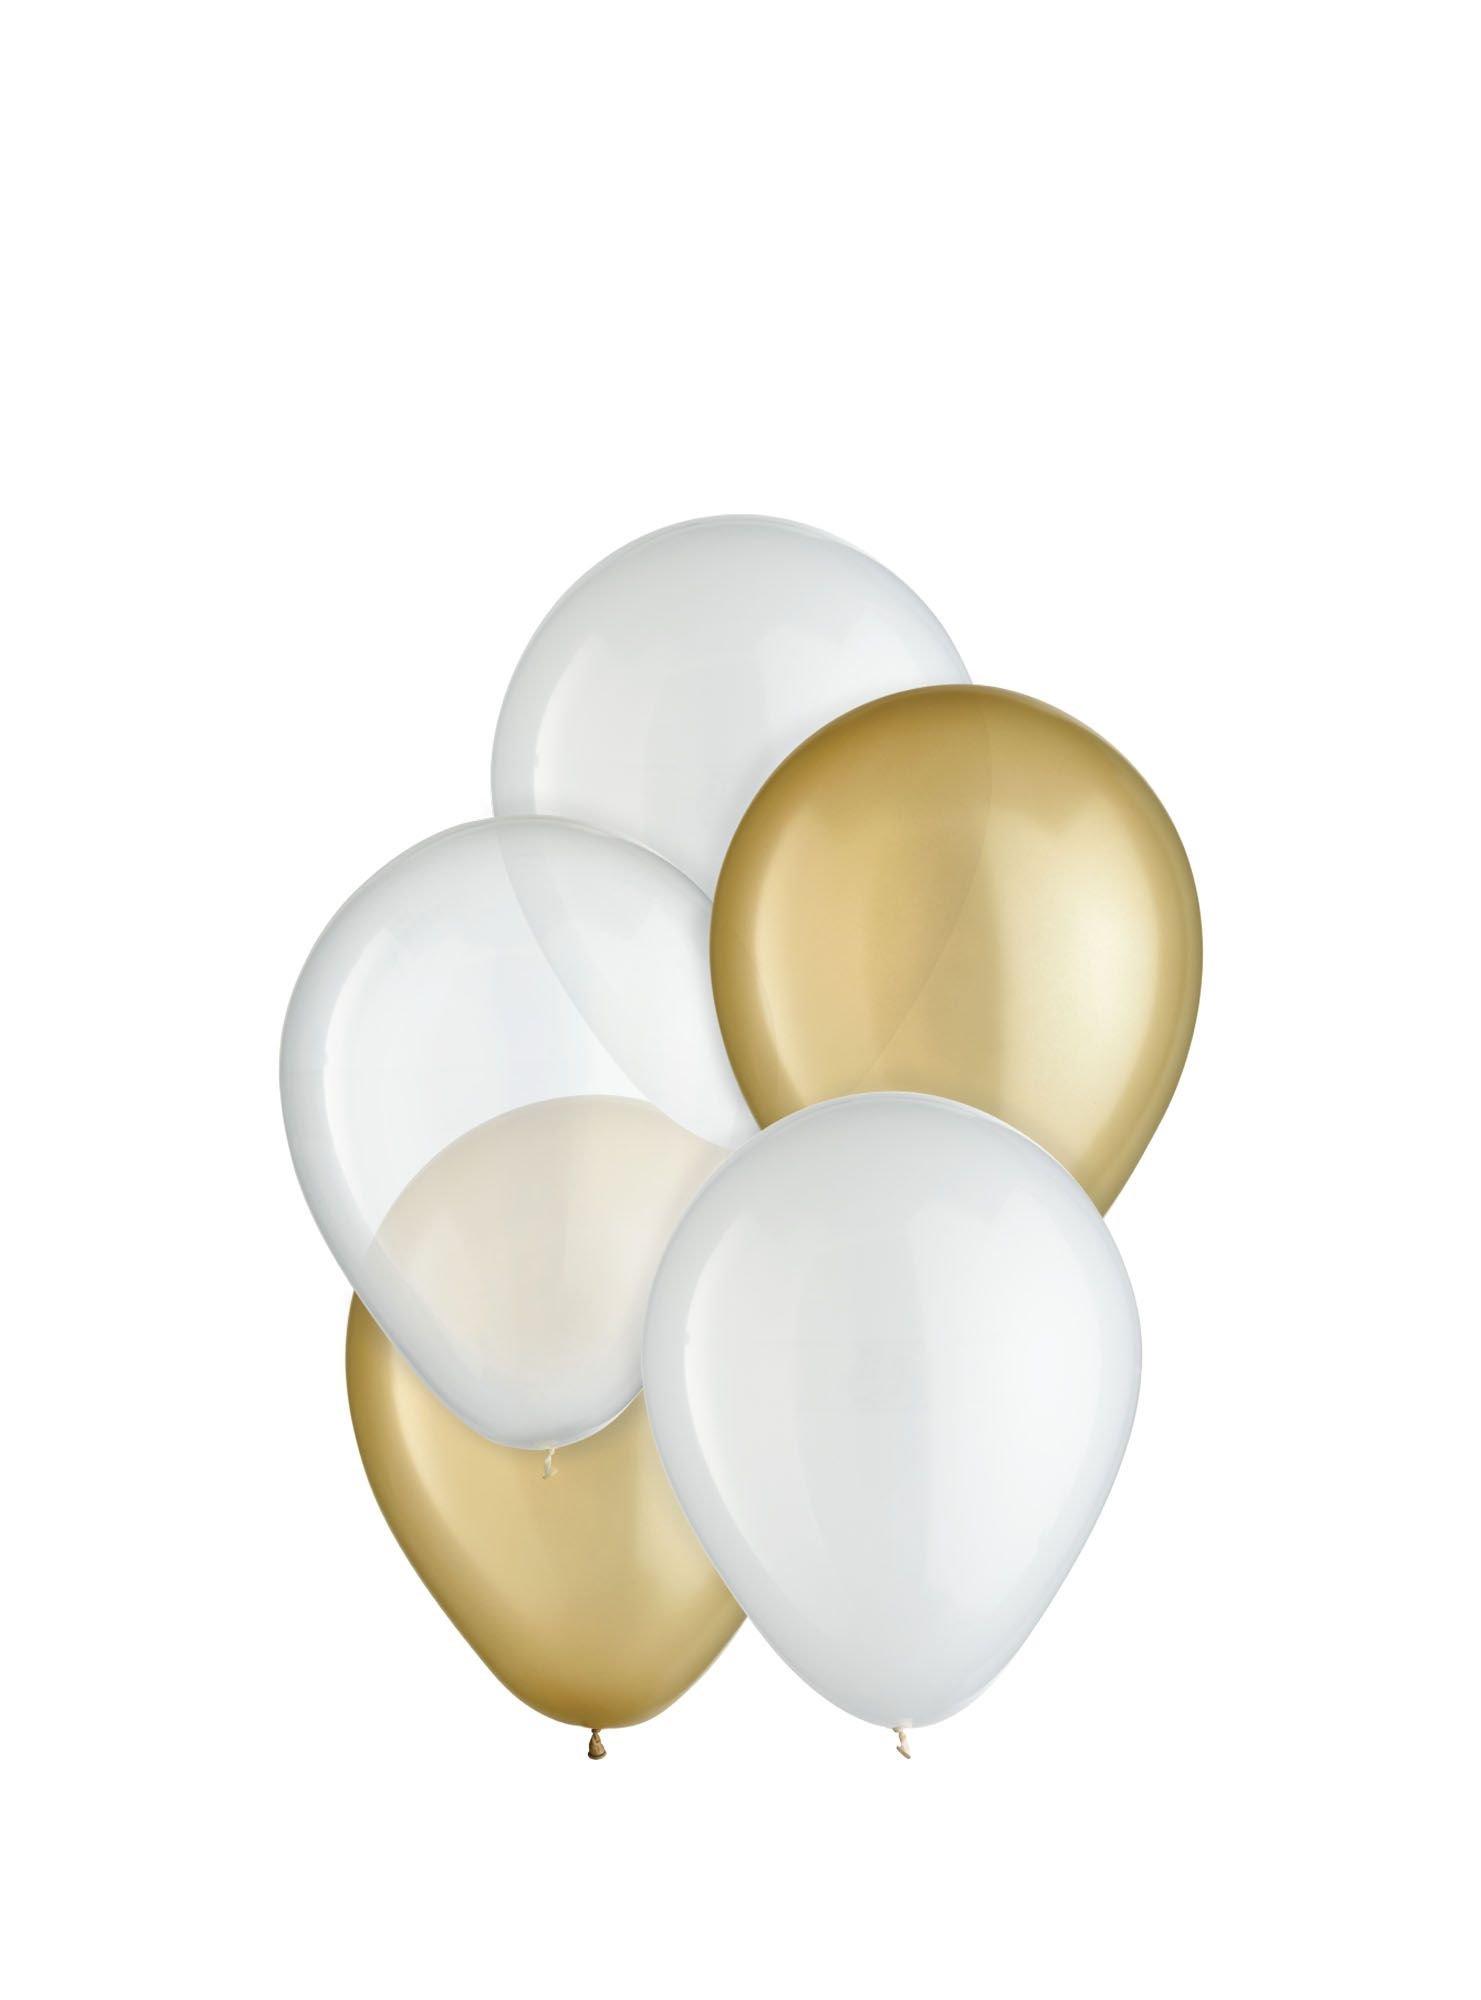 25ct, 5in, Golden 3-Color Mix Mini Latex Balloons - Clear, Gold & White